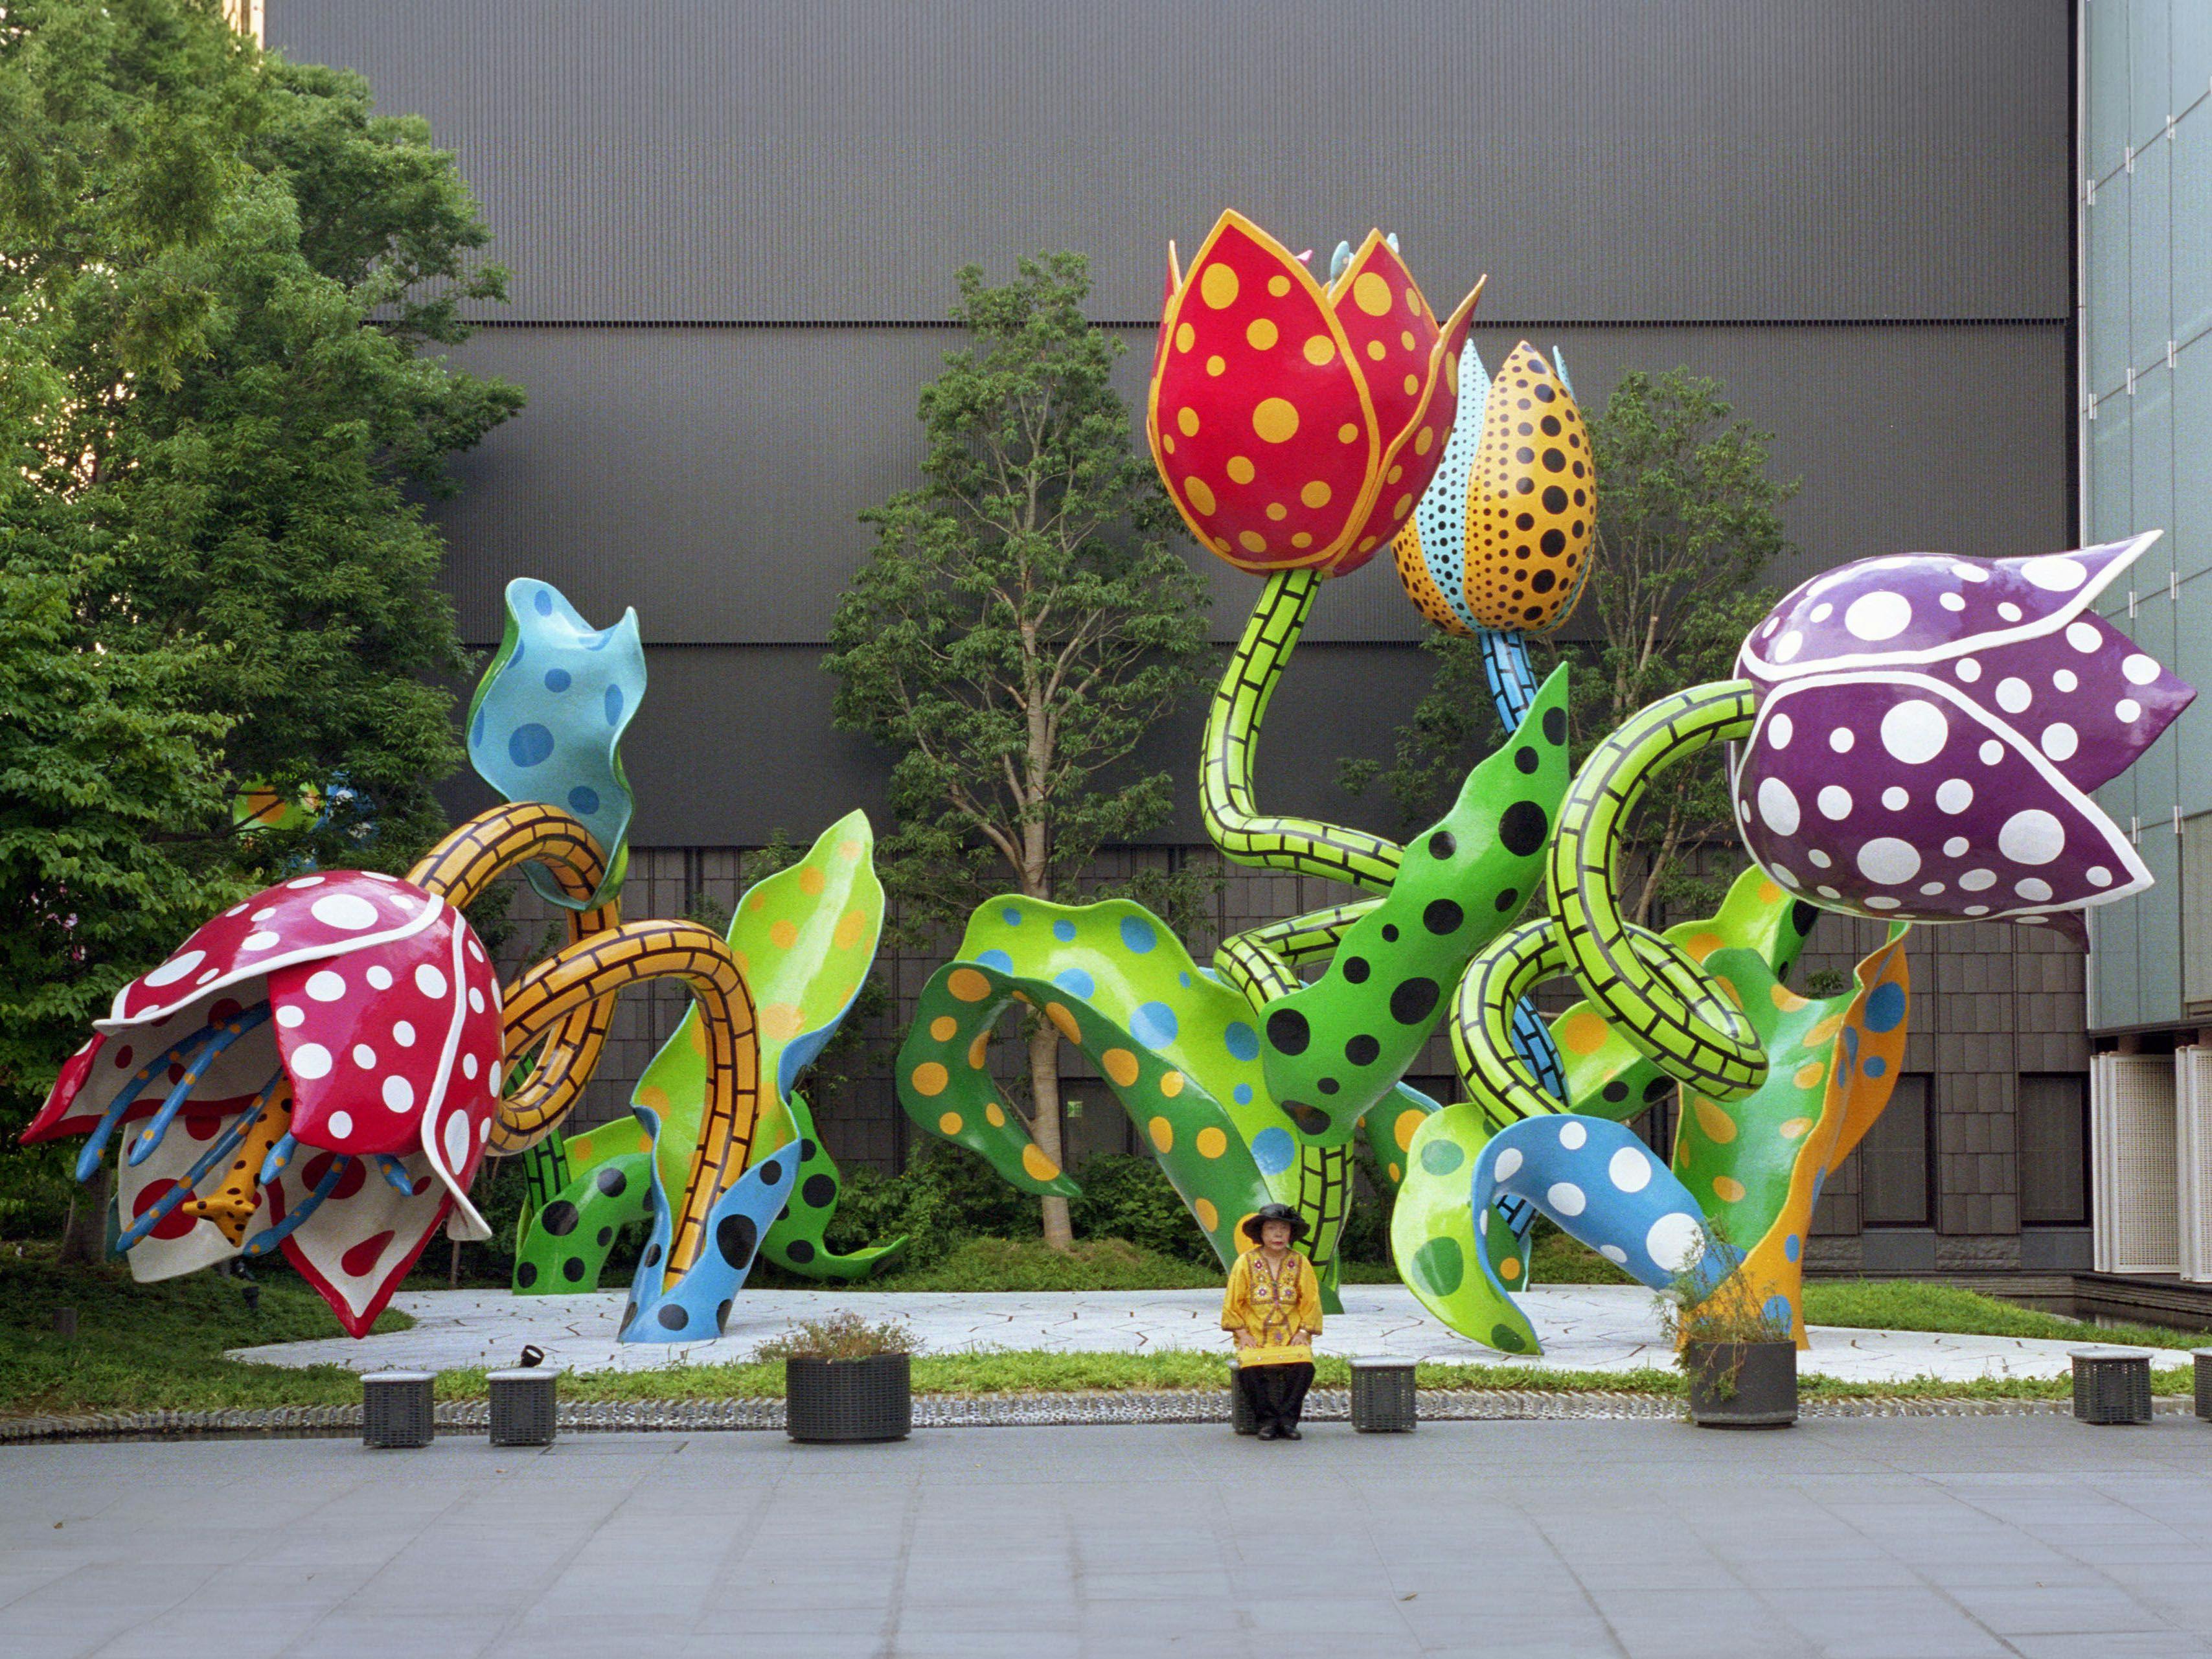 An installation by Yayoi Kusama, titled The Visionary Flowers, dated 2002.